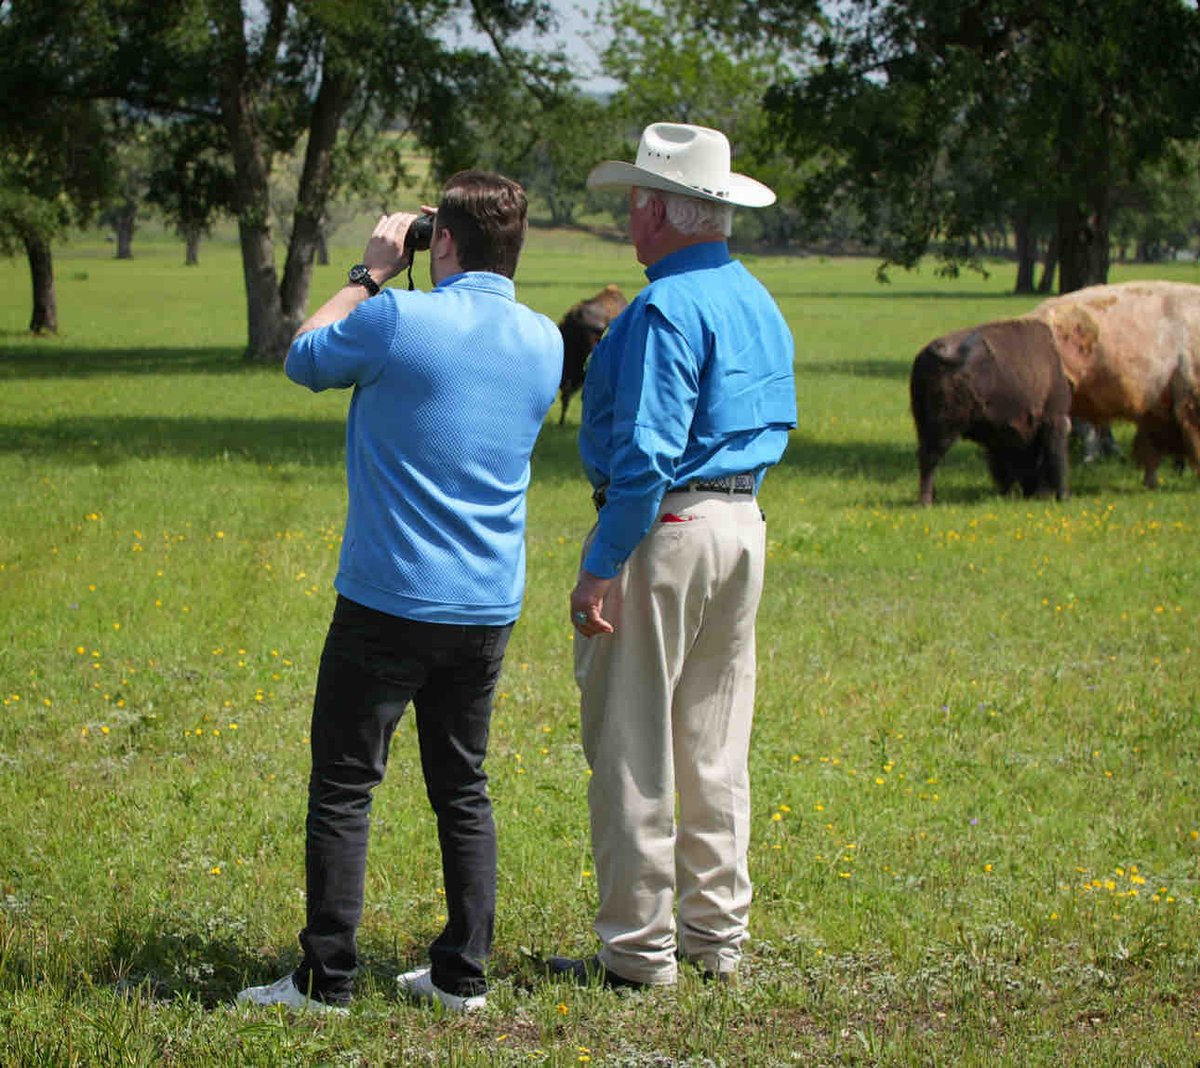 Commissioner Miller joined Carl Chambers at the Wagon Springs Ranch to see the newest addition to his buffalo herd, a rare white buffalo. To American Indians, a White Buffalo Calf is the most sacred living thing on earth #TexasAgricultureMatters